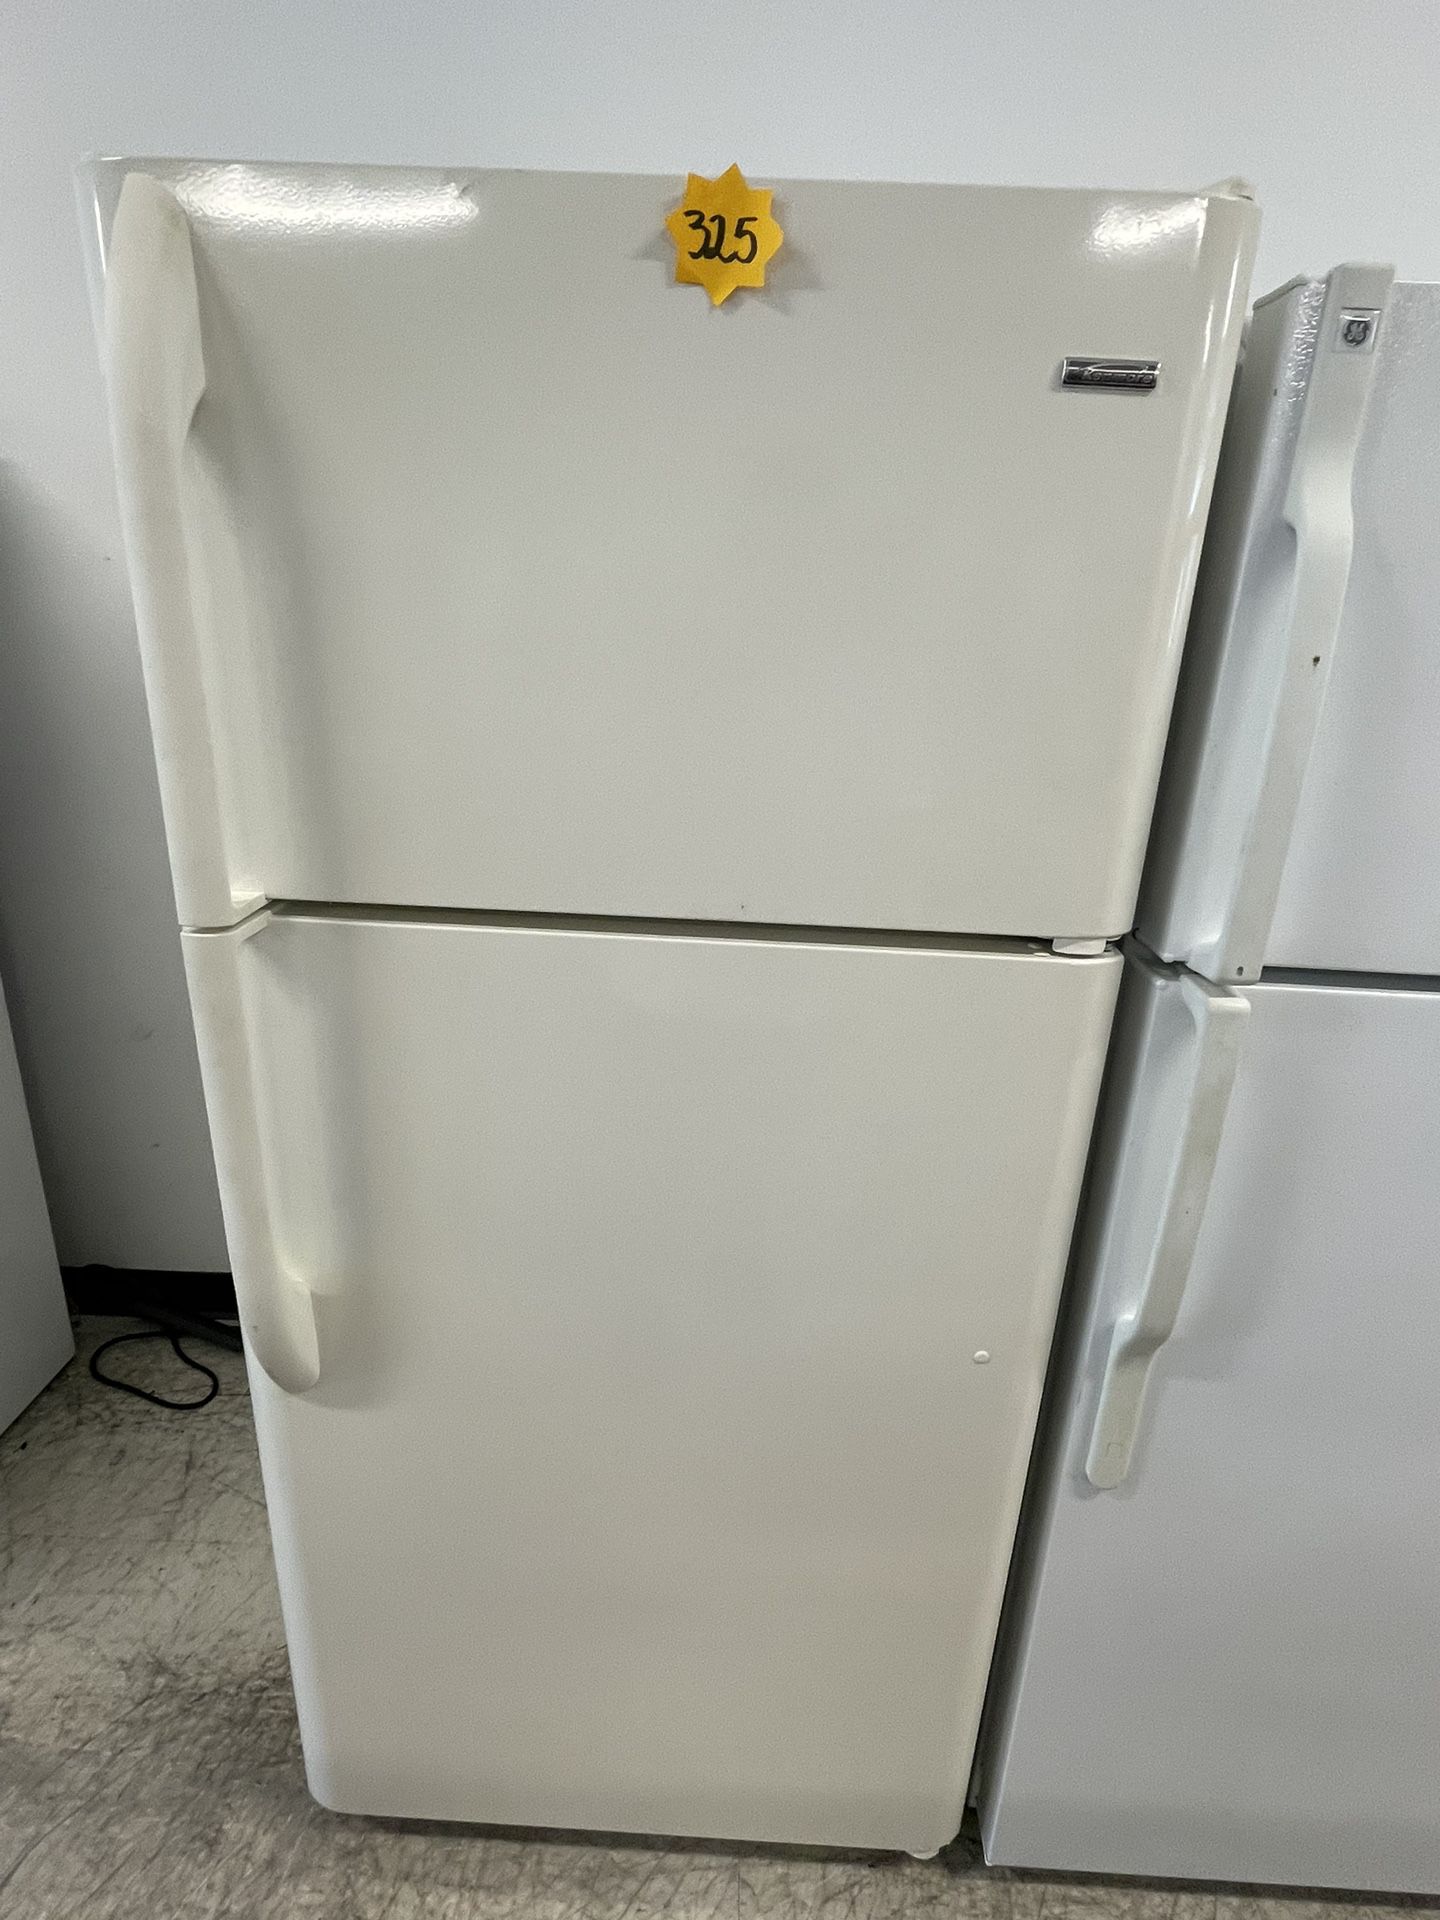 Kenmore Top Freezer Refrigerator Used Good Condition With 90days Warranty 